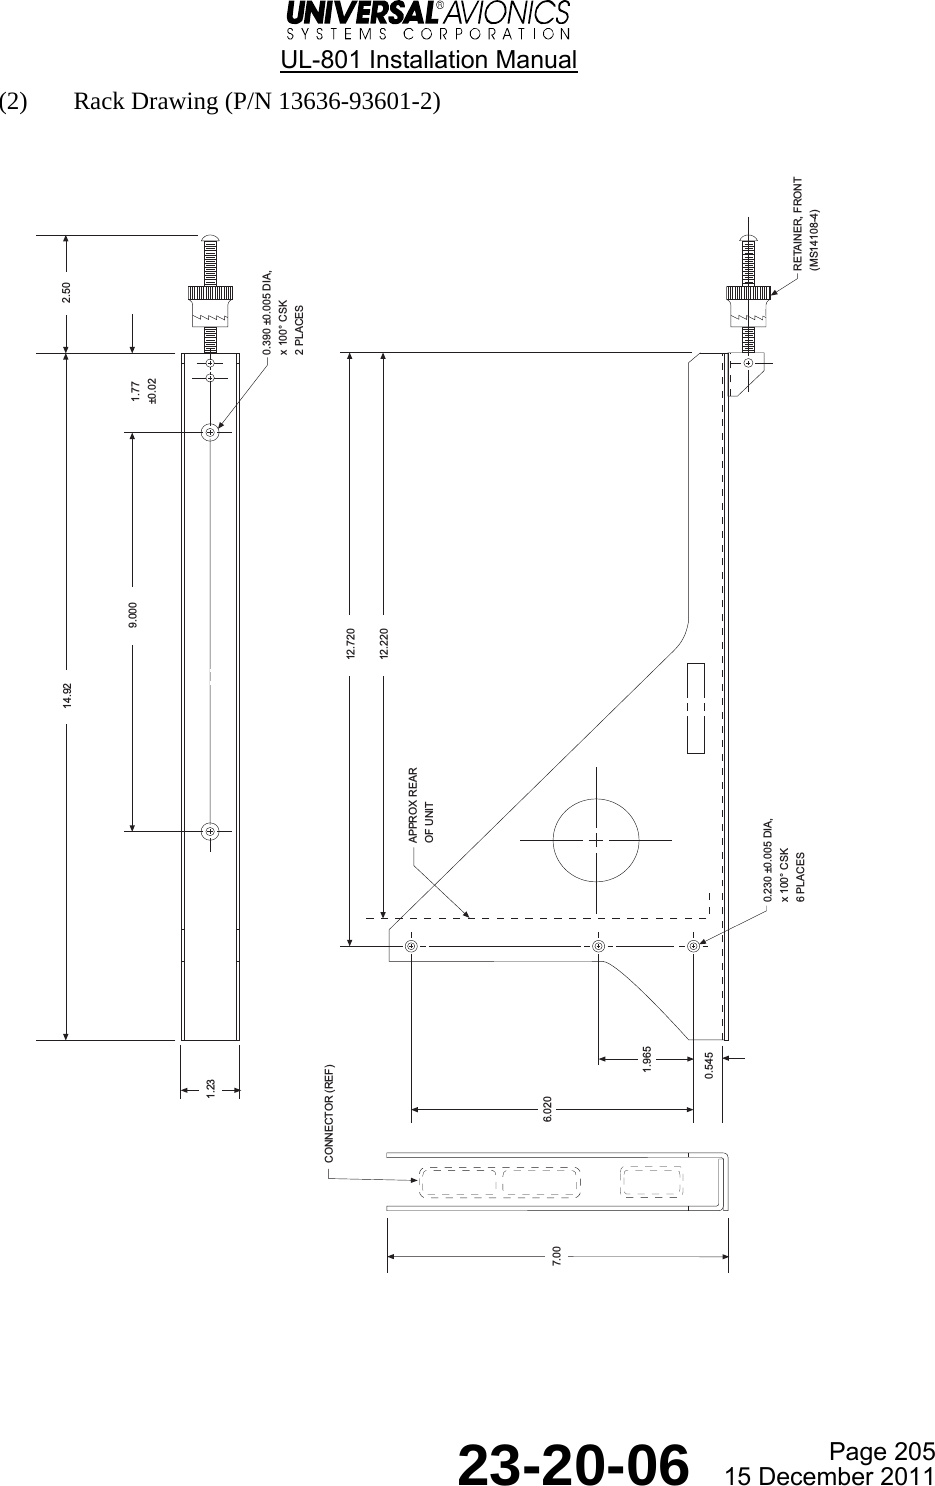  UL-801 Installation Manual  Page 205  23-20-06  15 December 2011 (2) Rack Drawing (P/N 13636-93601-2)  2.5014.929.000 1.77±0.020.390 ±0.005 DIA,x 100° CSK2 PLACES7.00 CONNECTOR (REF)1.9650.5456.02012.720RETAINER, FRONT(MS14108-4)0.230 ±0.005 DIA,x 100° CSK6 PLACES1.2312.220APPROX REAROF UNIT